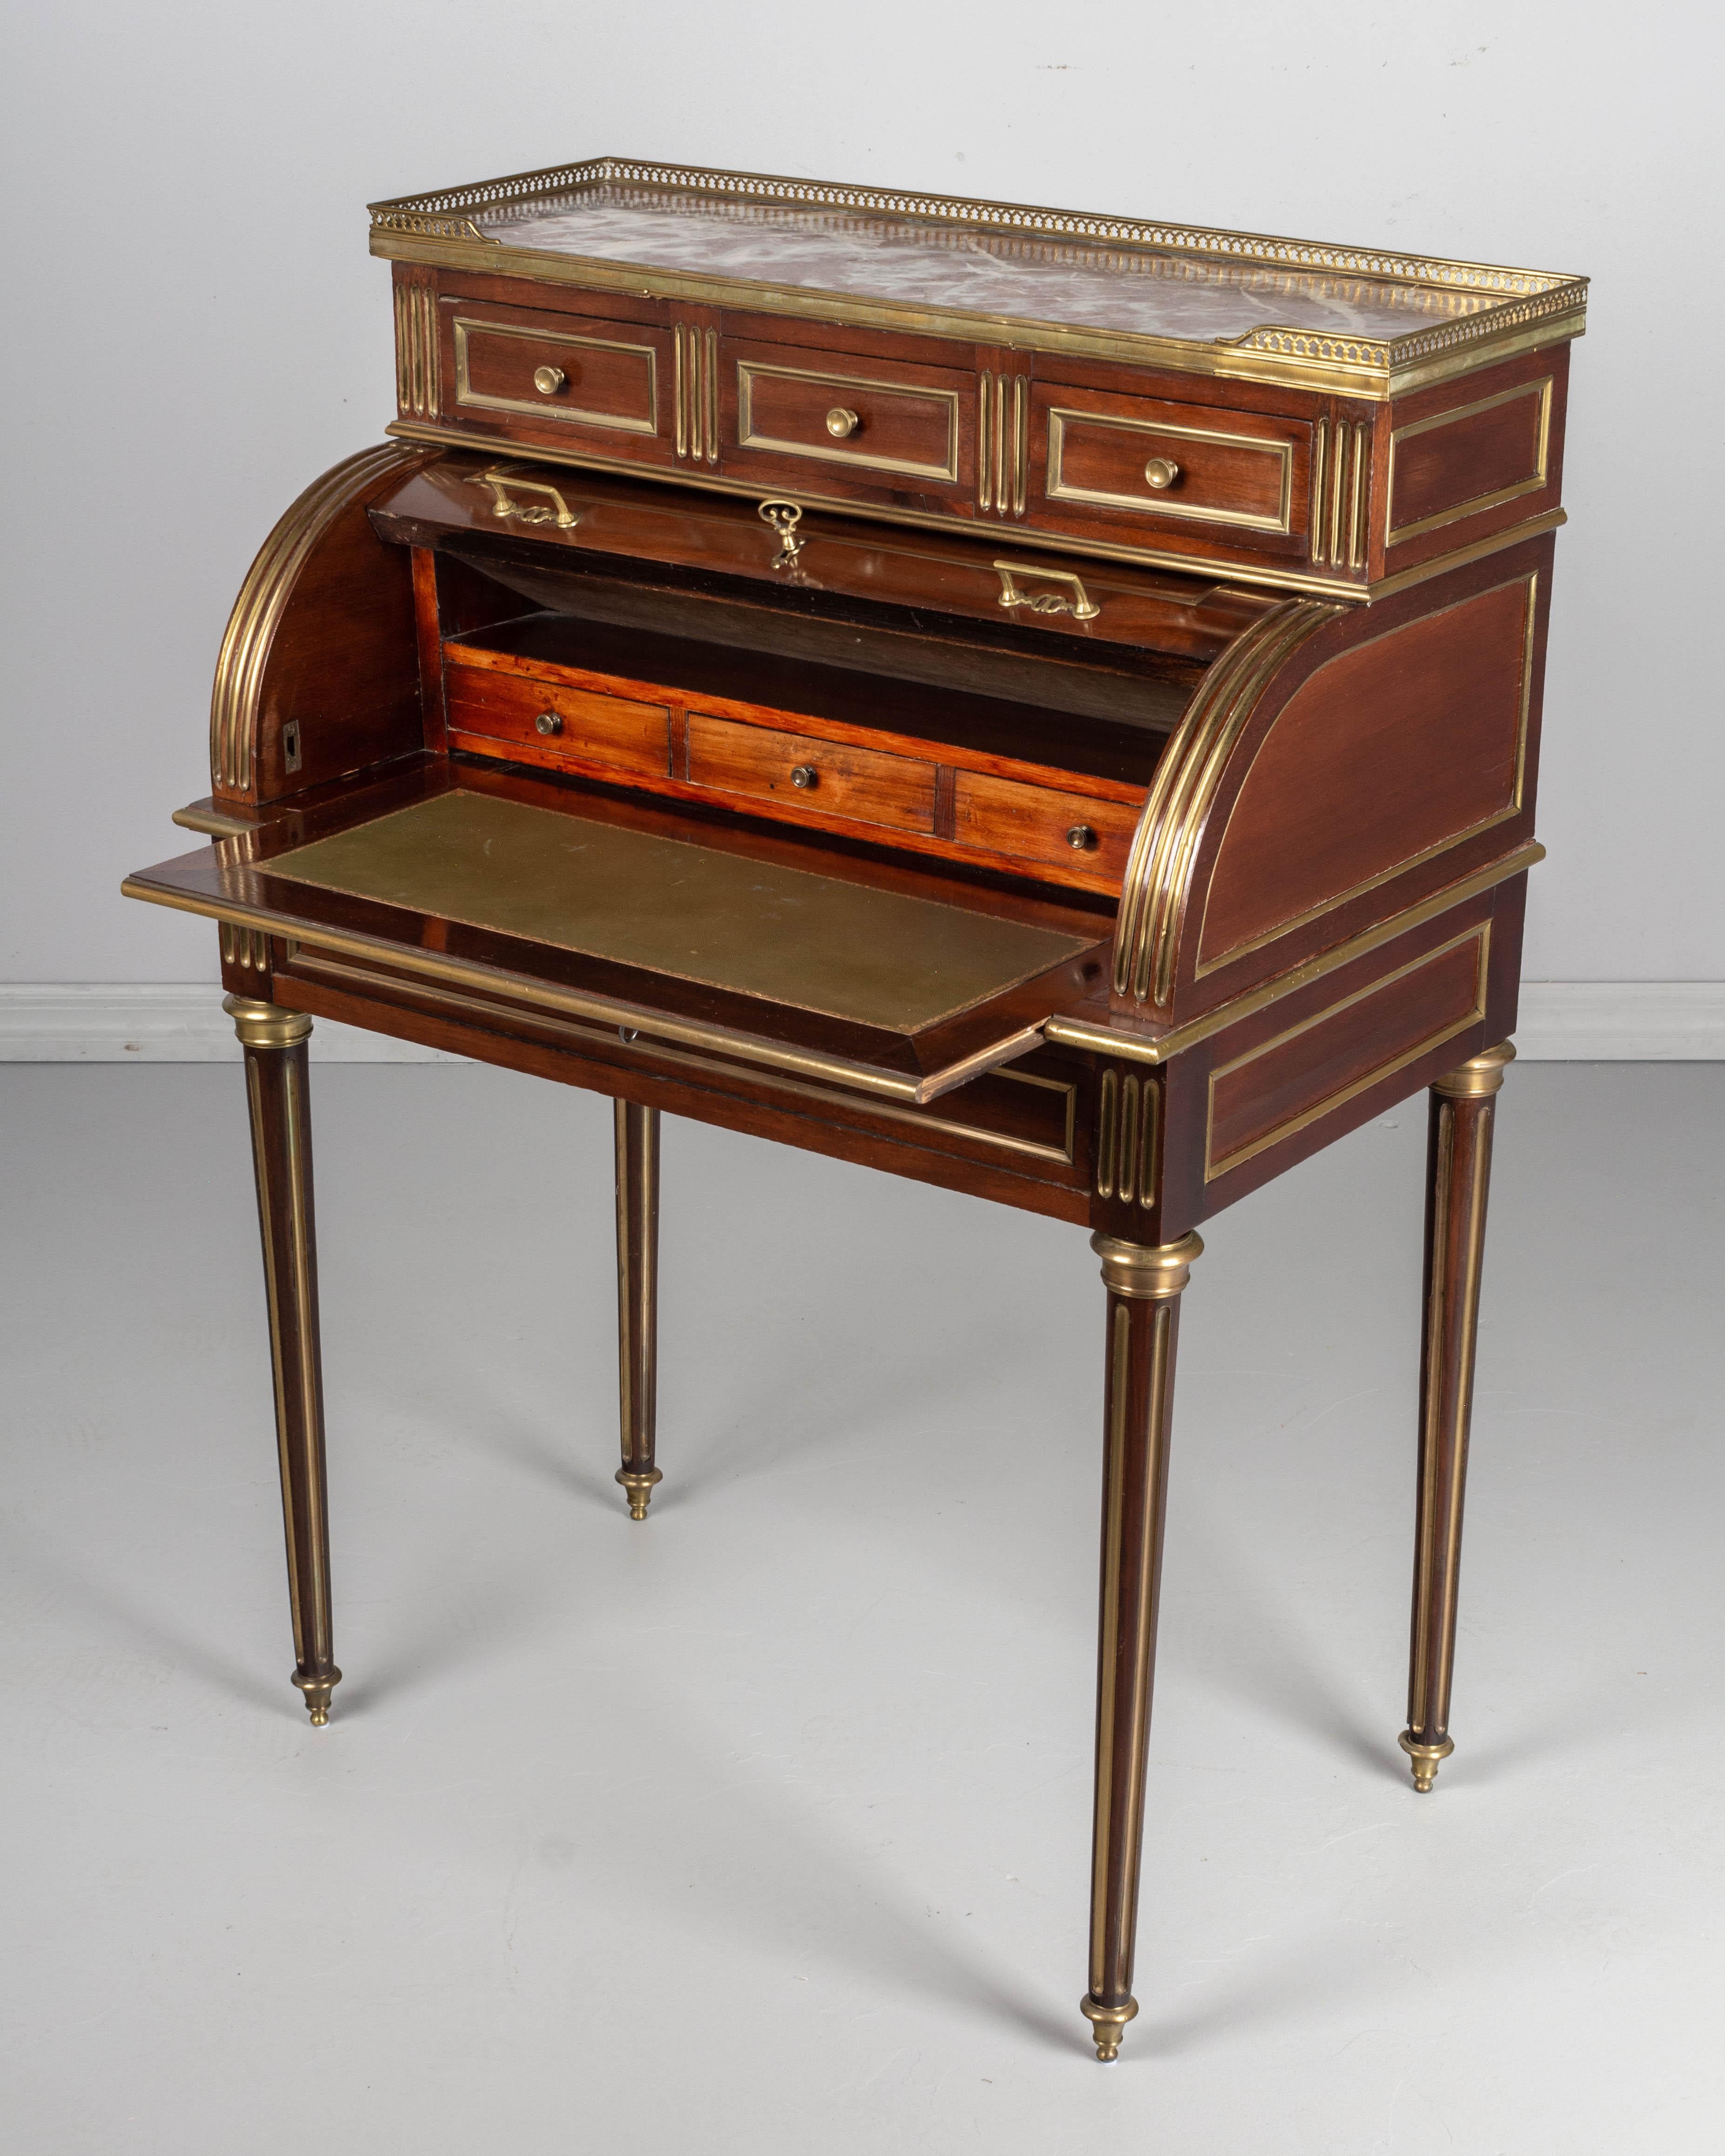 French 19th Century Louis XVI Style Bureau à Cylindre or Roll Top Desk